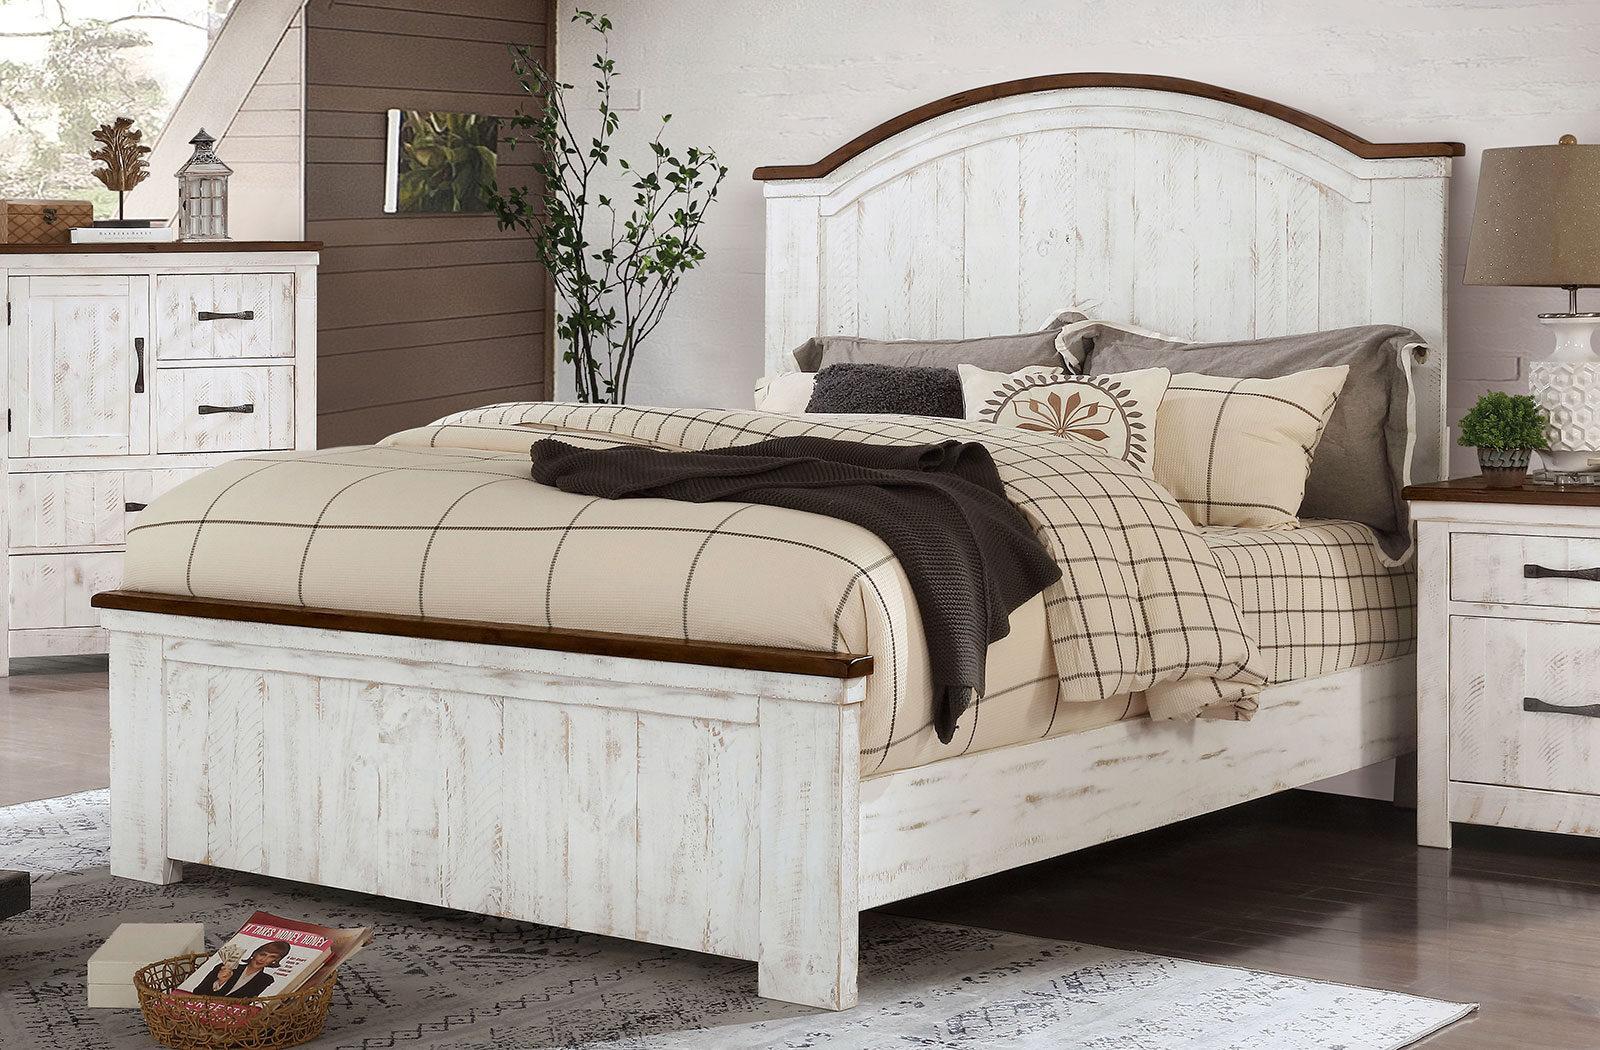 

    
Transitional Distressed White & Walnut Solid Wood King Bedroom Set 6pcs Furniture of America CM7962 Alyson
